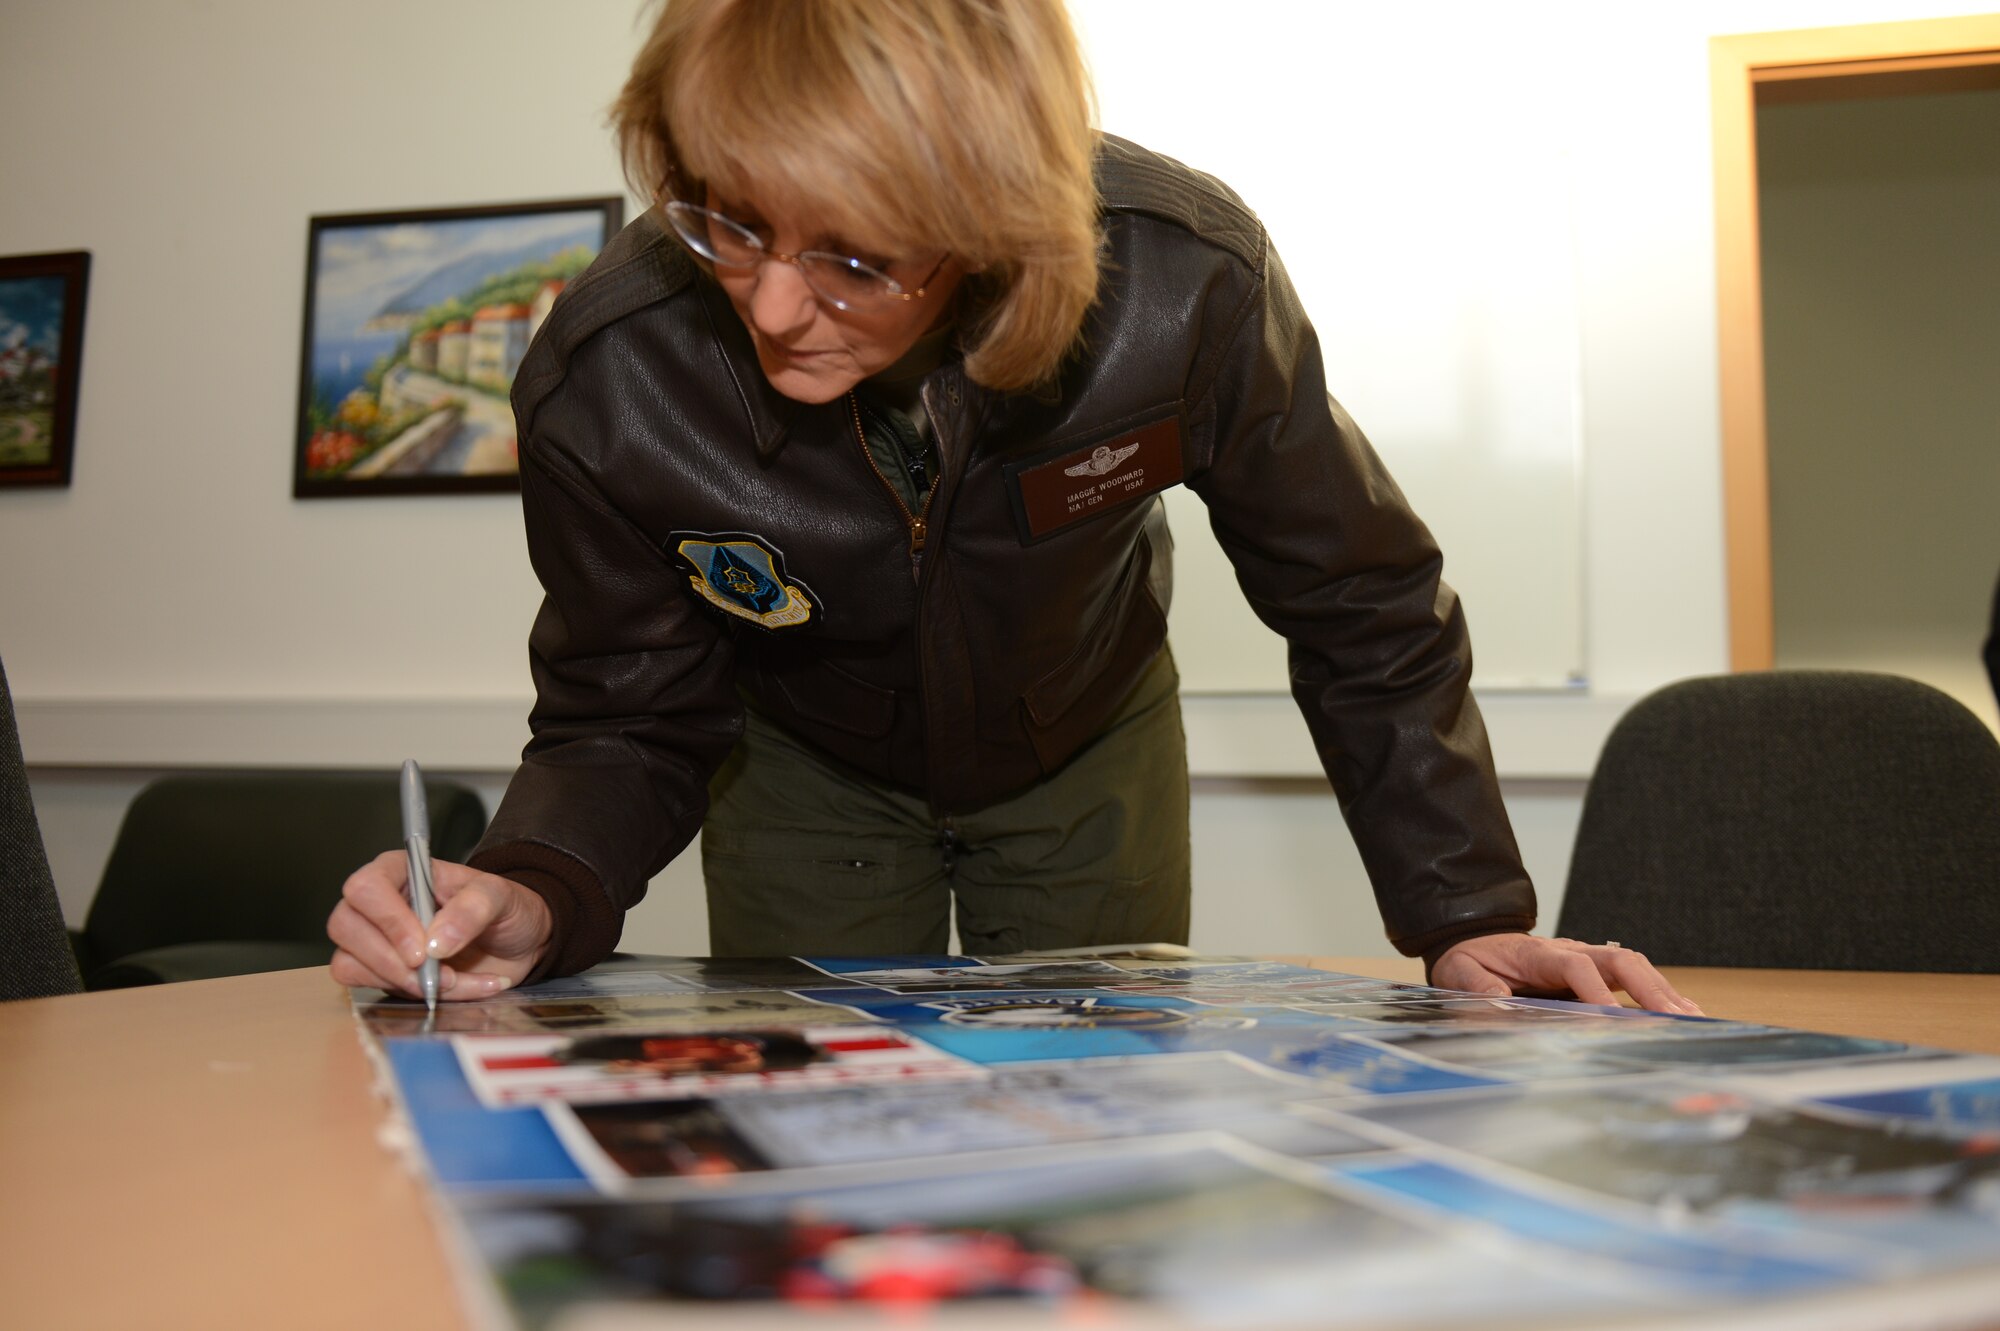 SPANGDAHLEM AIR BASE, Germany – U.S. Air Force Maj. Gen. Margaret Woodward, Air Force Chief of Safety, signs a safety poster inside the 52nd Fighter Wing Safety office Dec. 12, 2012. Woodward visited Spangdahlem to experience firsthand the safety office’s vision, values and mission. (U.S. Air Force photo by Airman 1st Class Gustavo Castillo/Released)